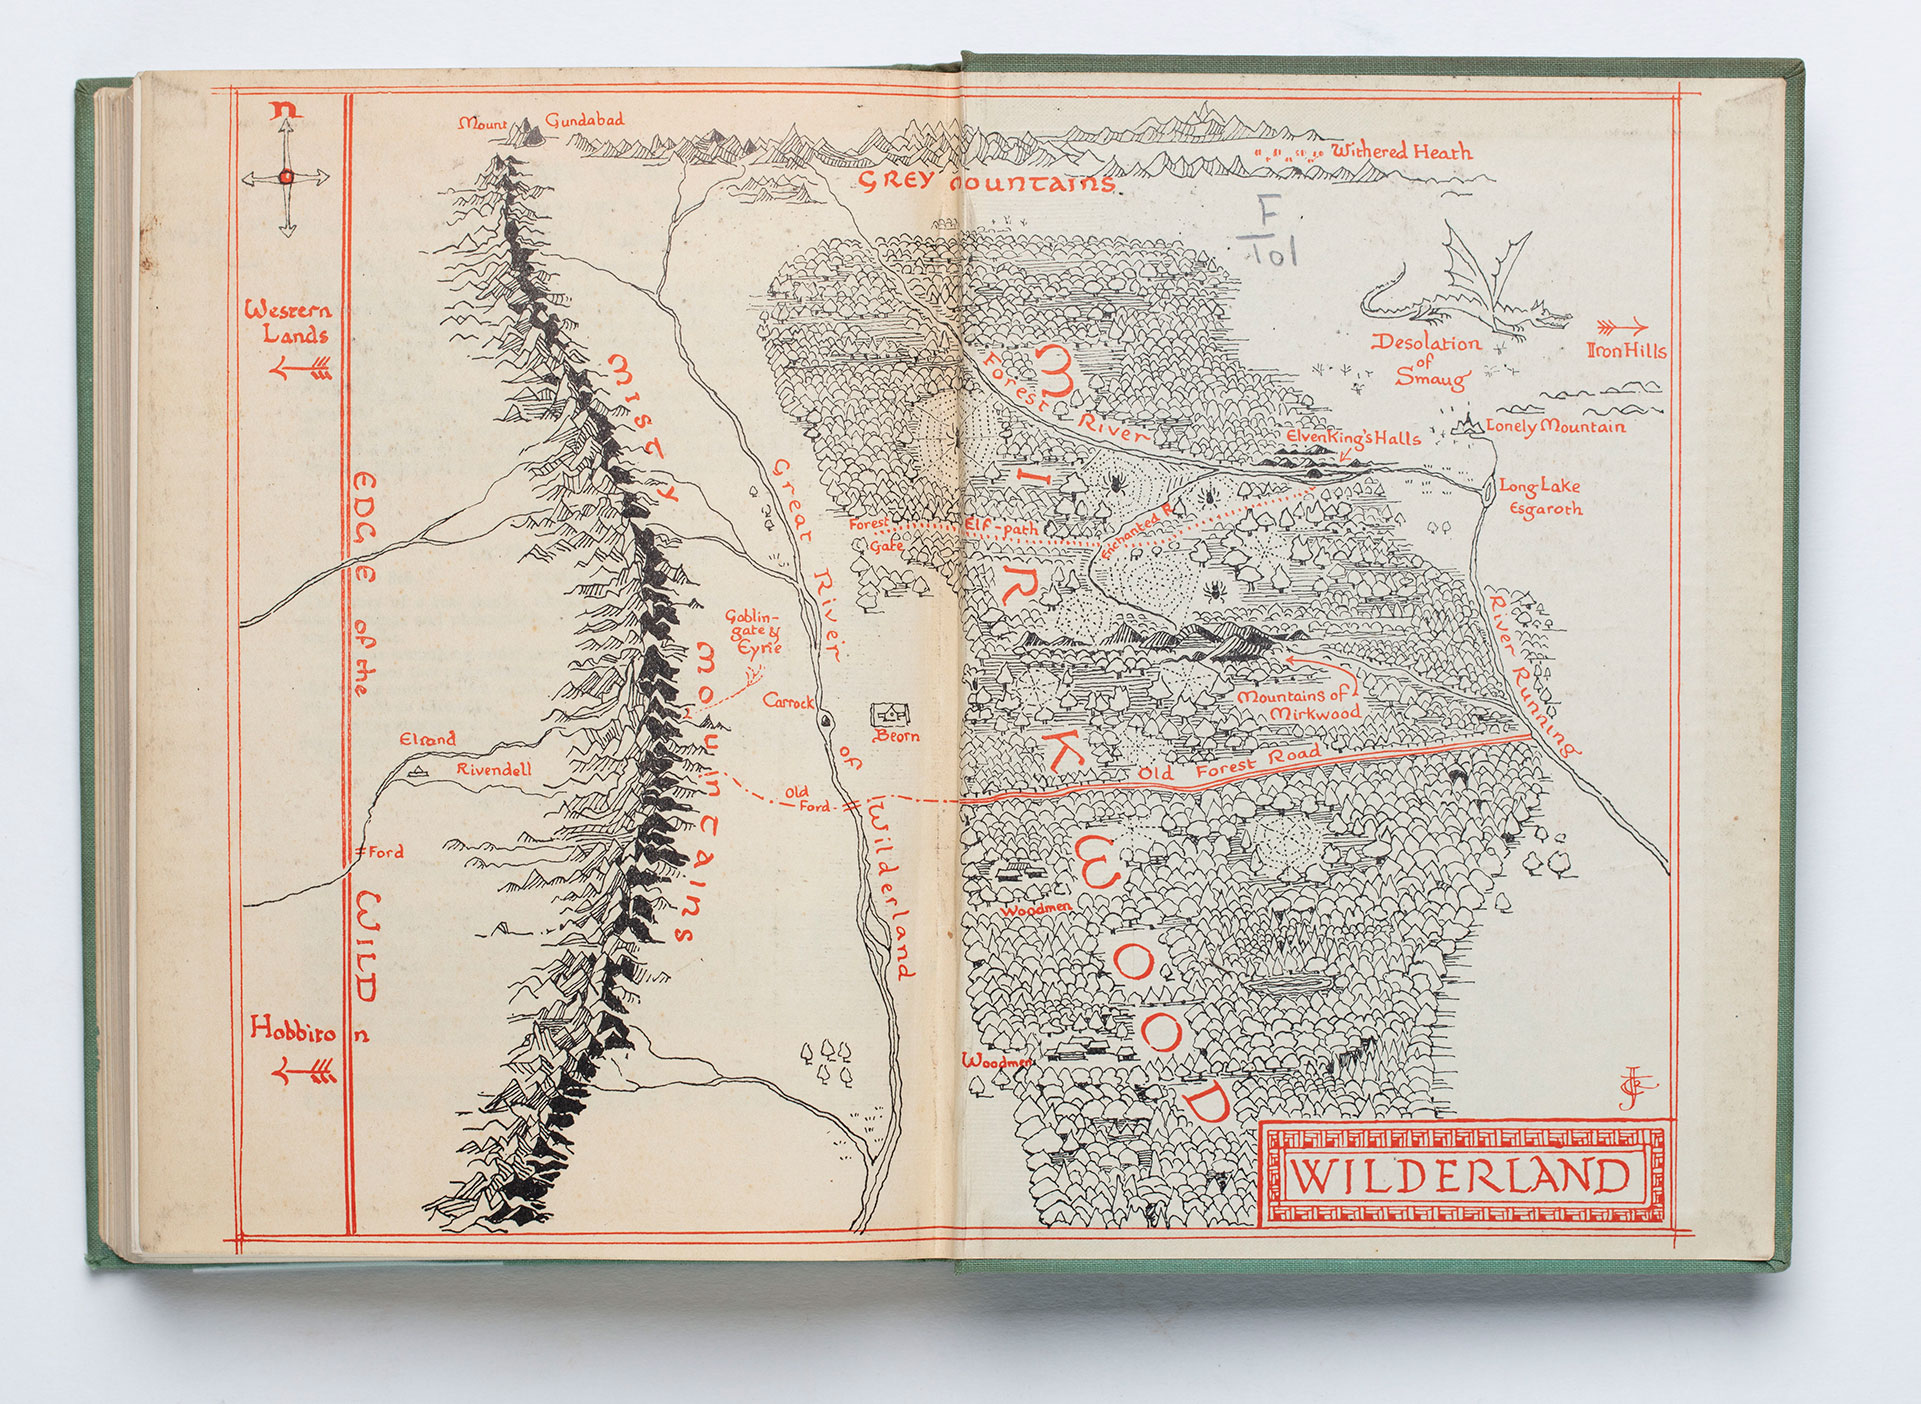 Endpapers illustrating a map of J R R Tolkien's universe.